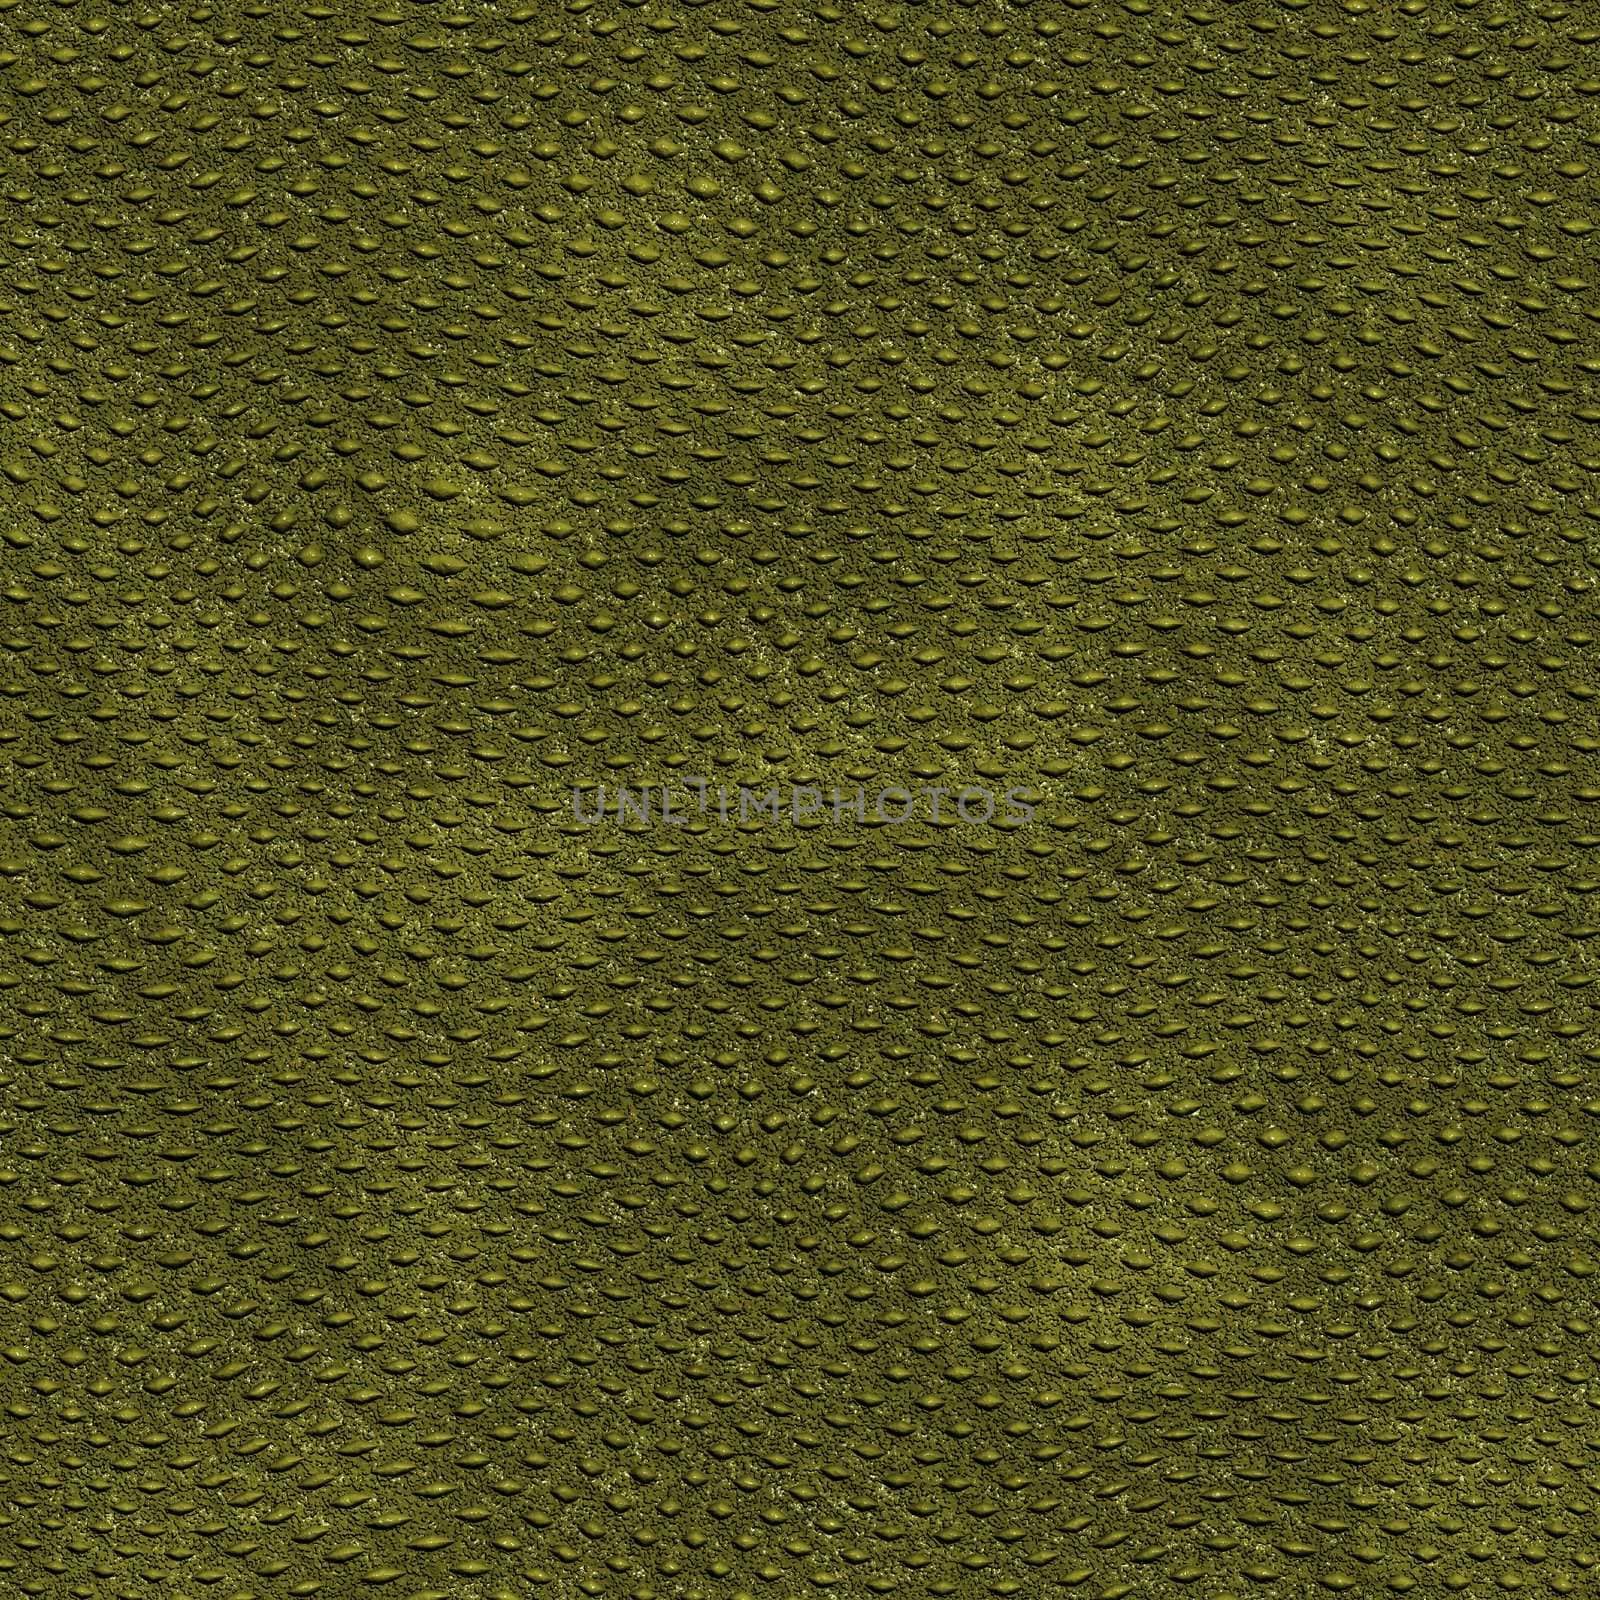 a large illustration of crocodile or alligator skin and scales